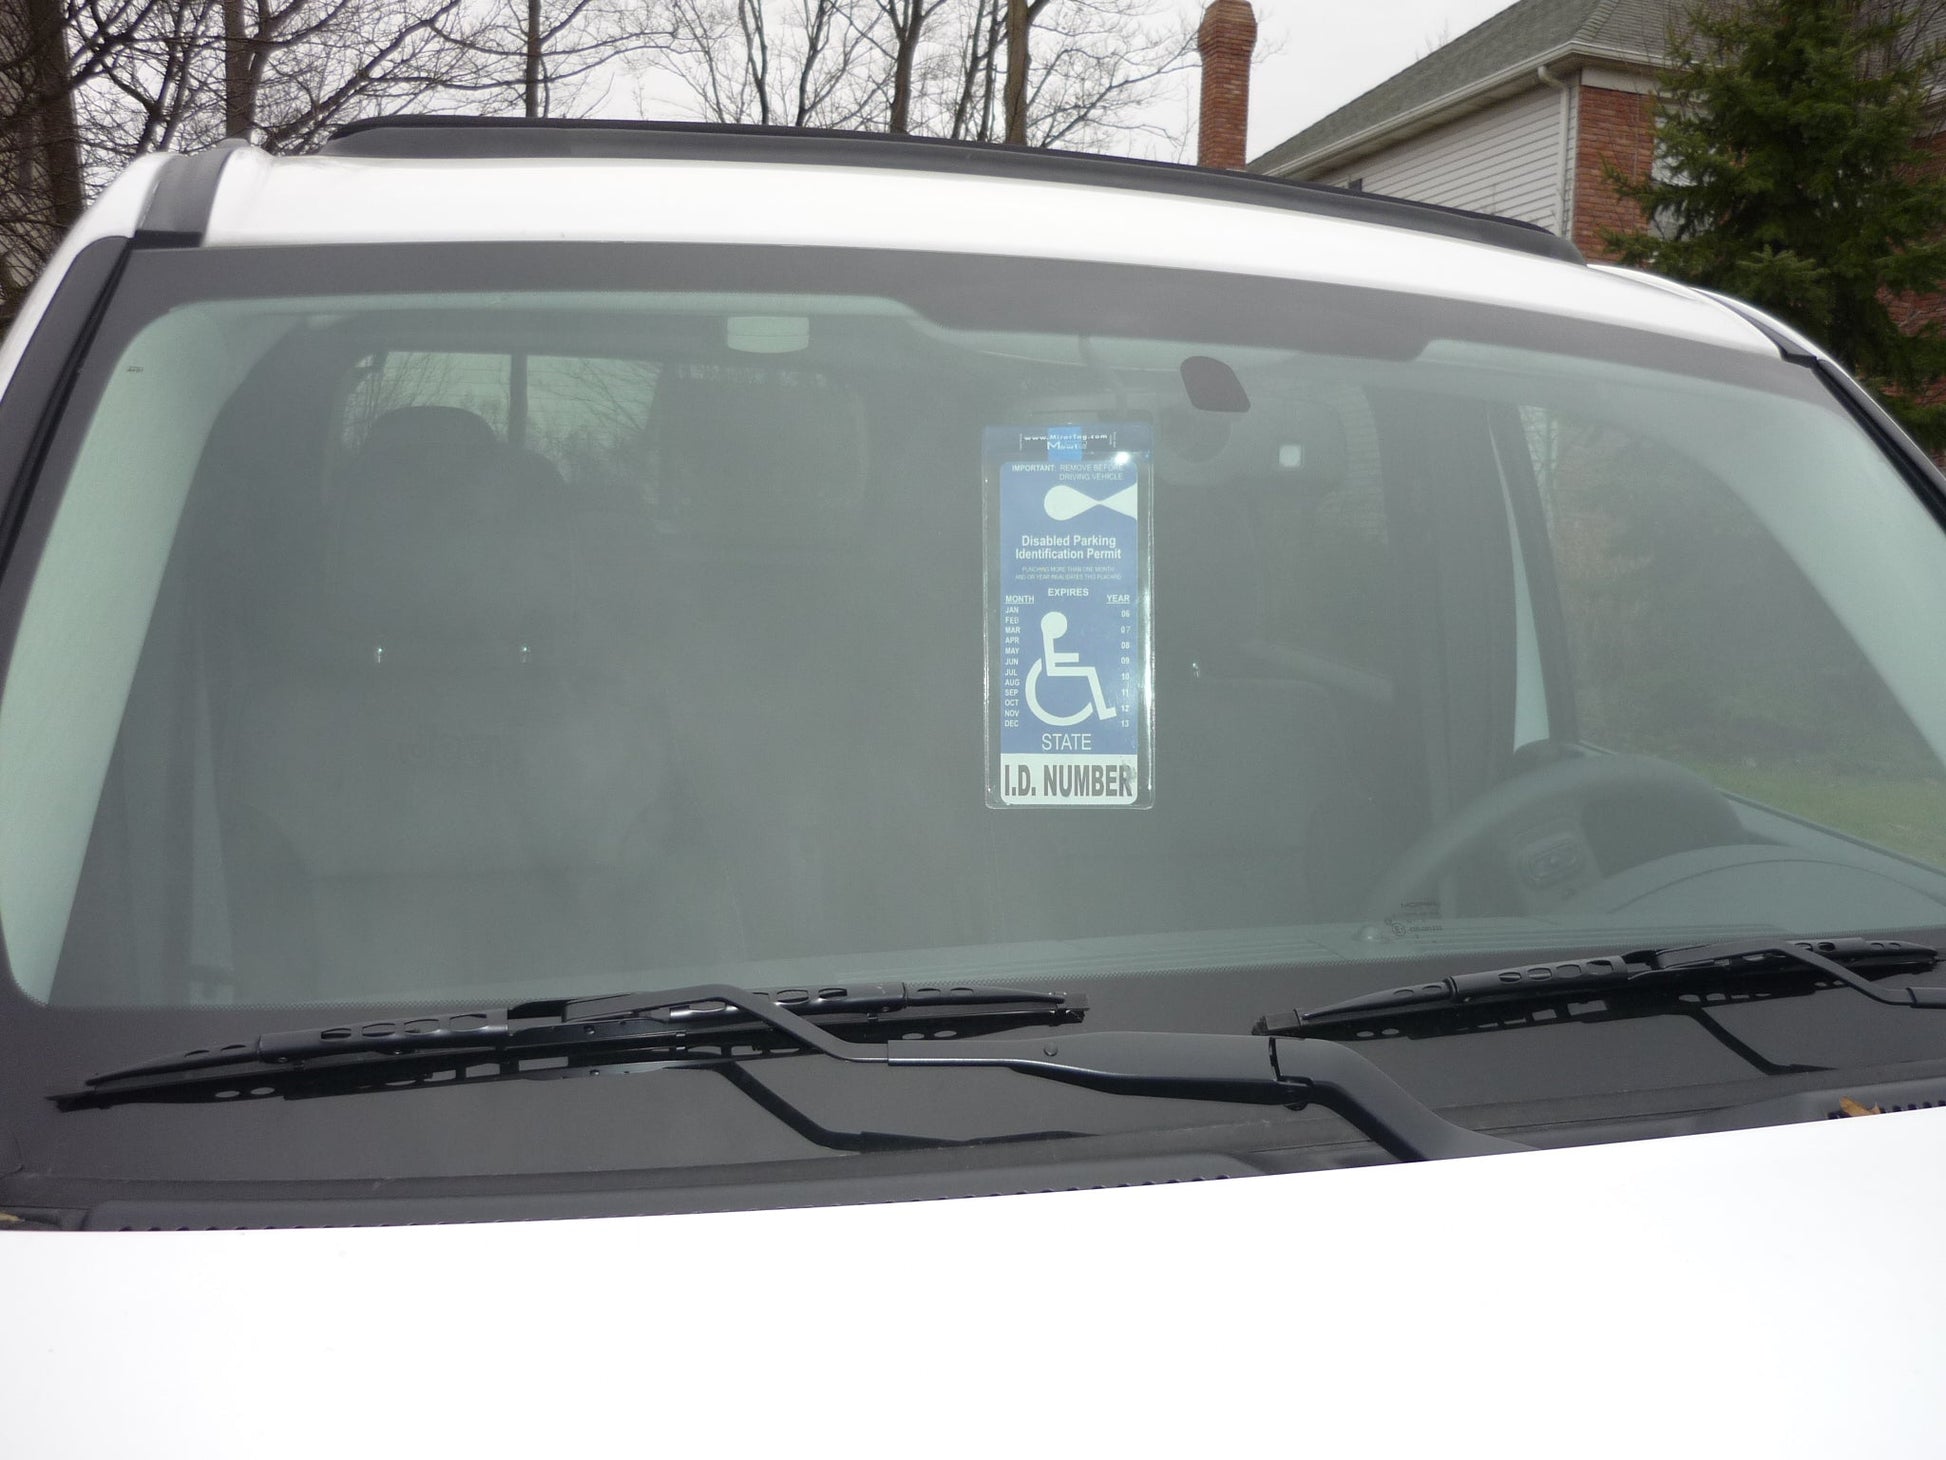 Handicap cover and sleeve for parking permit